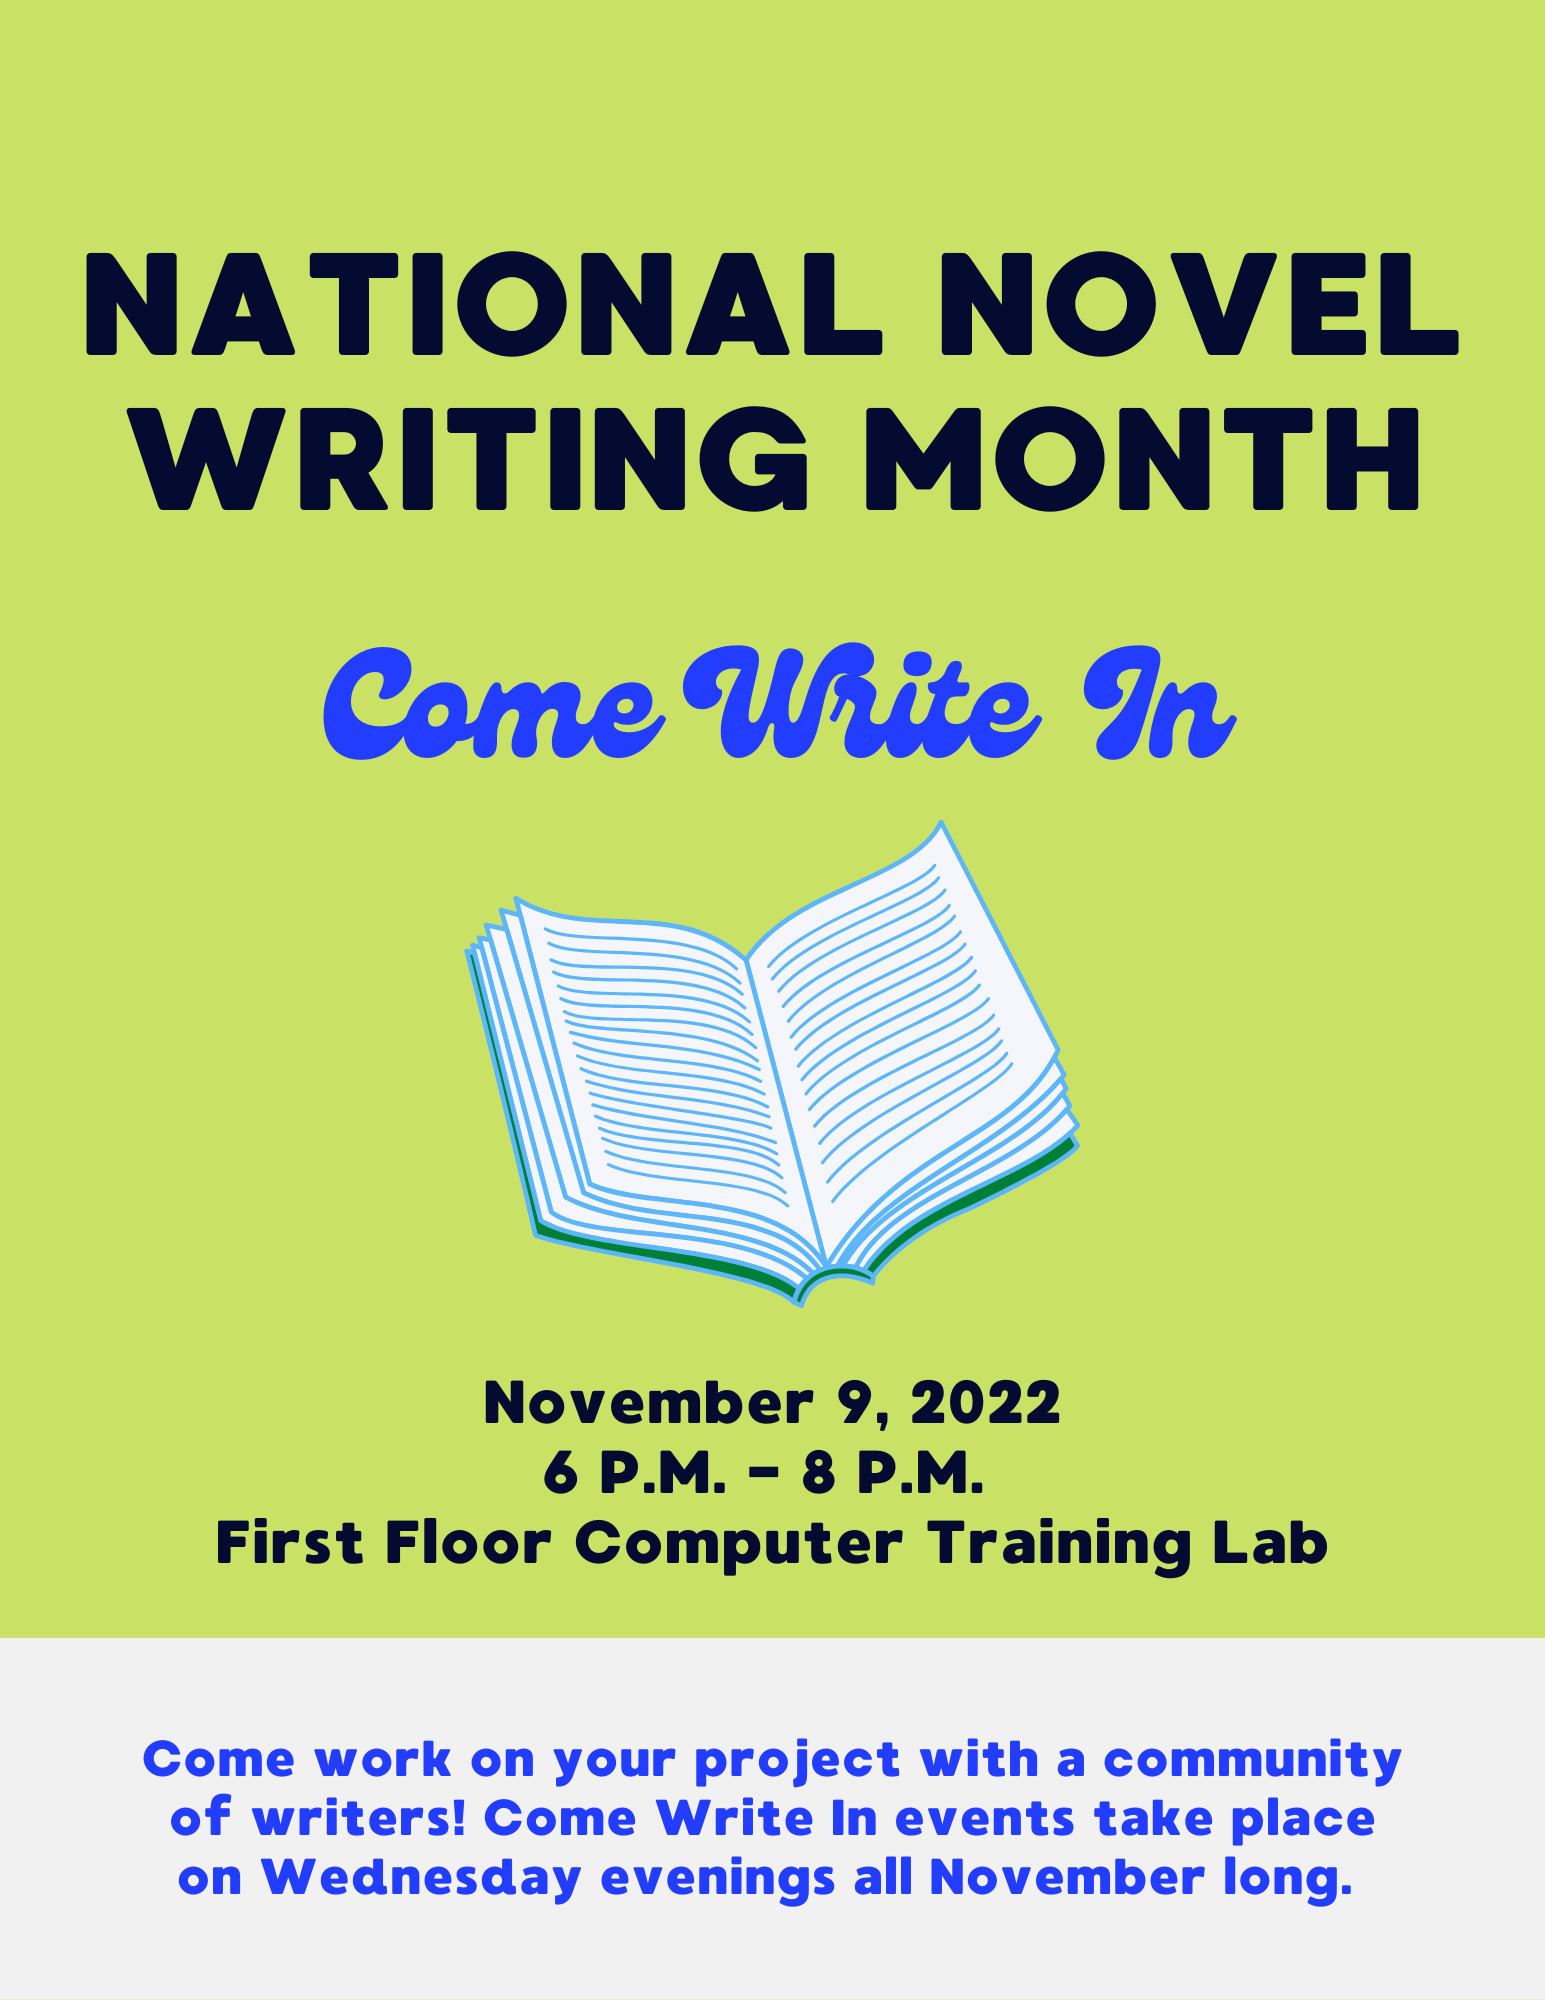 National Novel Writing Month Come Write In: November 9, 2022 from 6:00 p.m. - 8:00 p.m. 